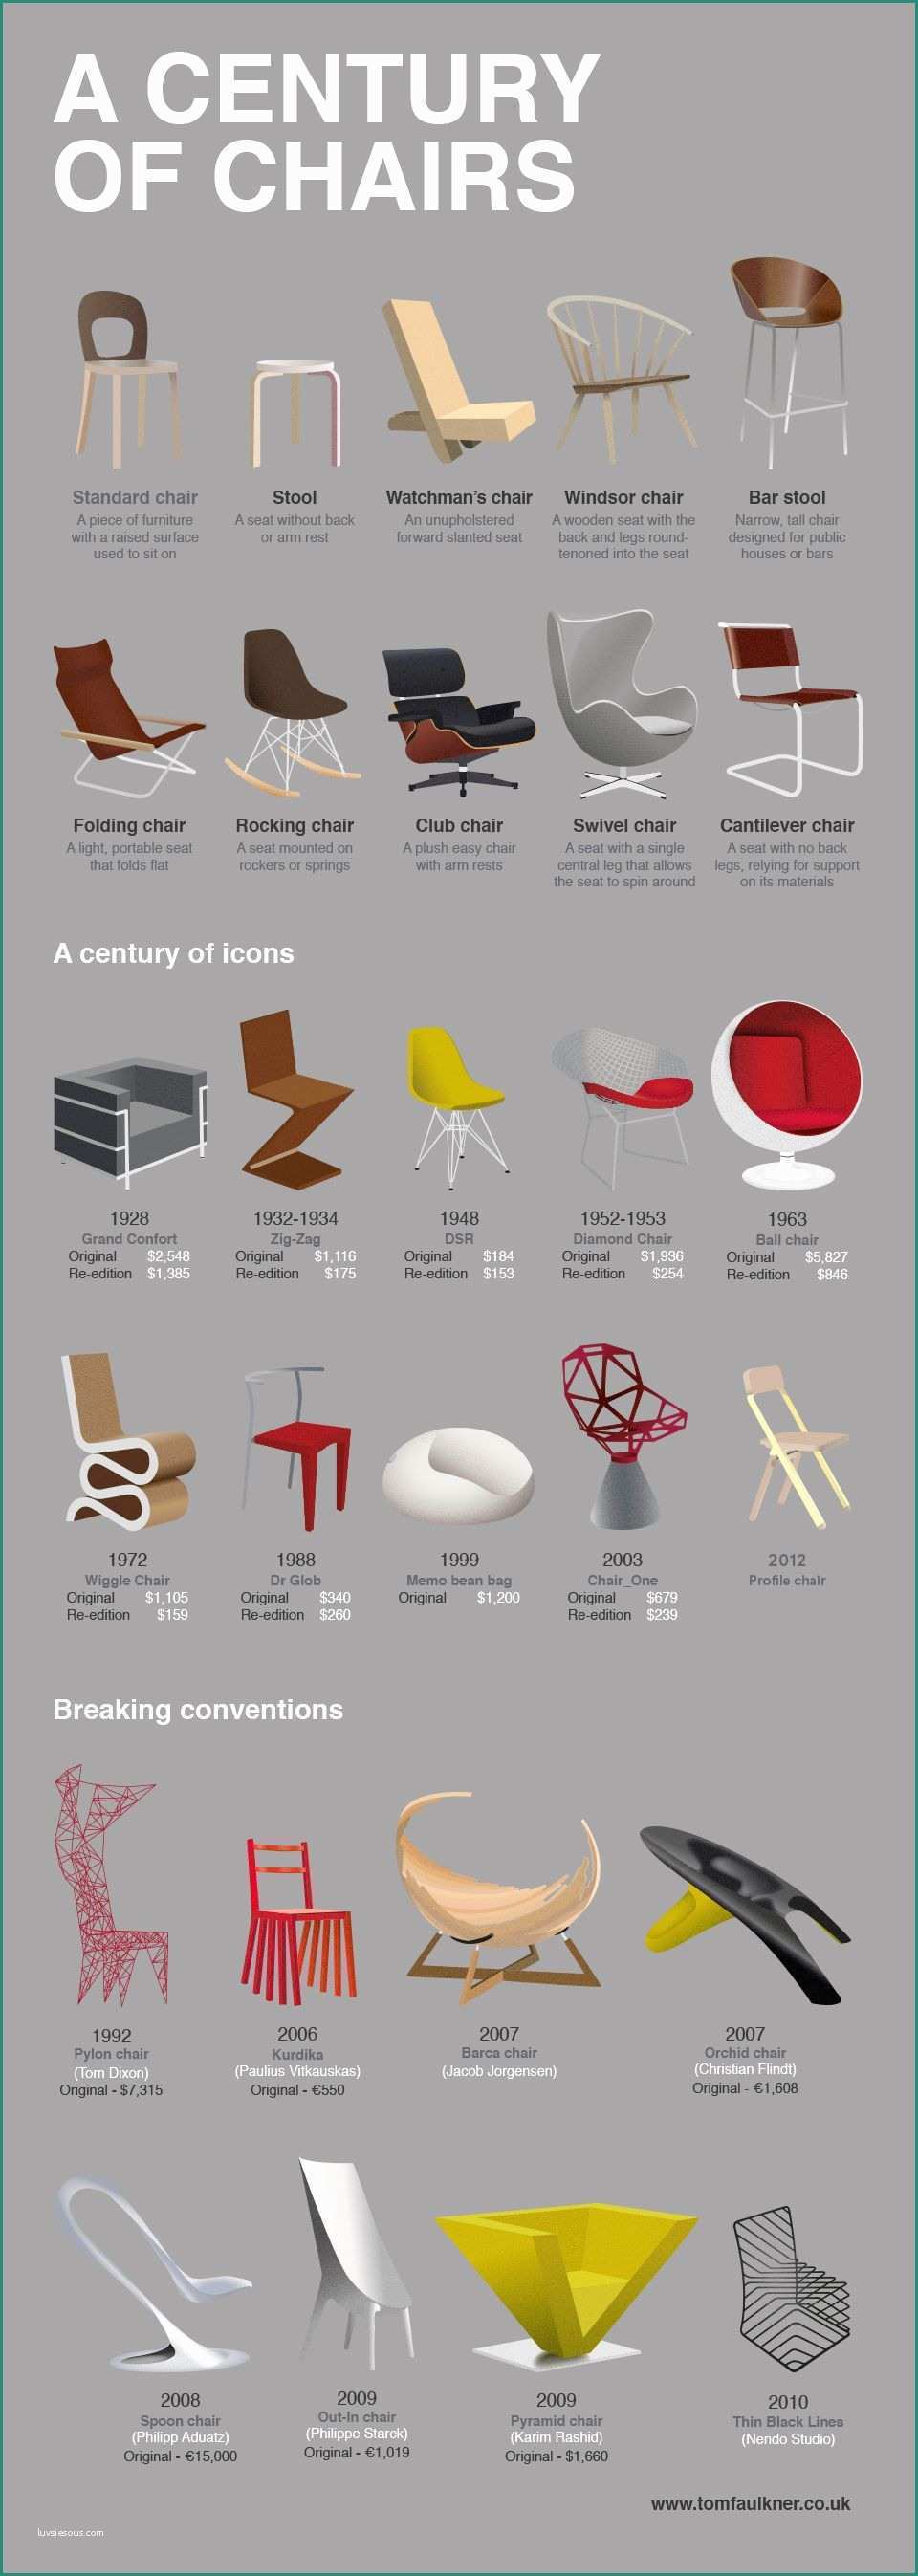 Alvar Aalto Sedie E A Brilliantly Stylised and Striking Infographic Showing the